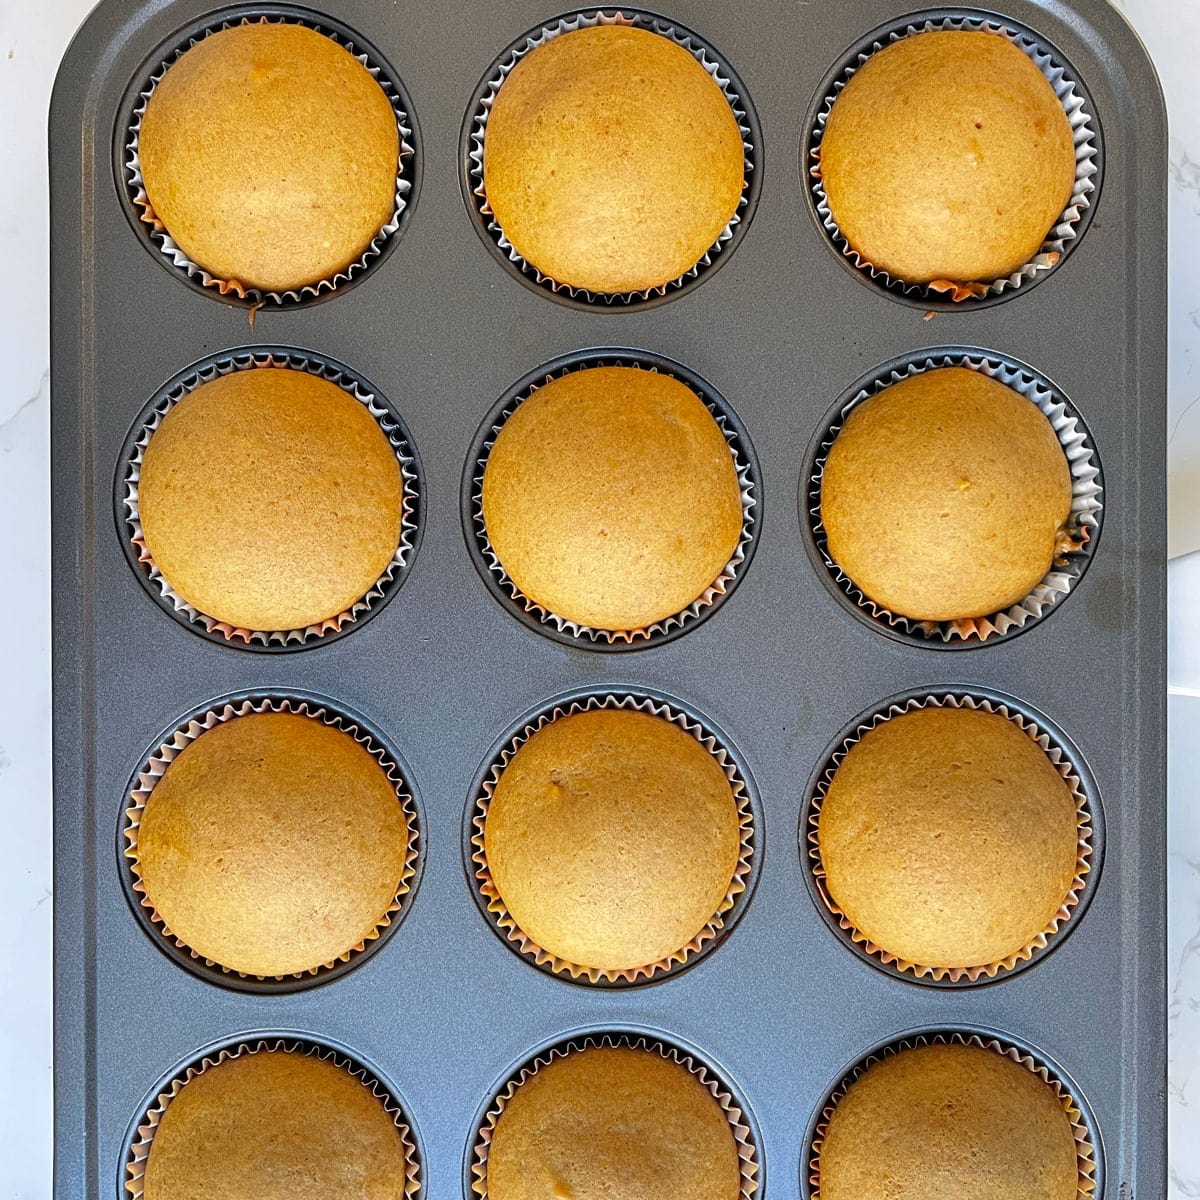 Baked pumpkin cup cake in baking tray.